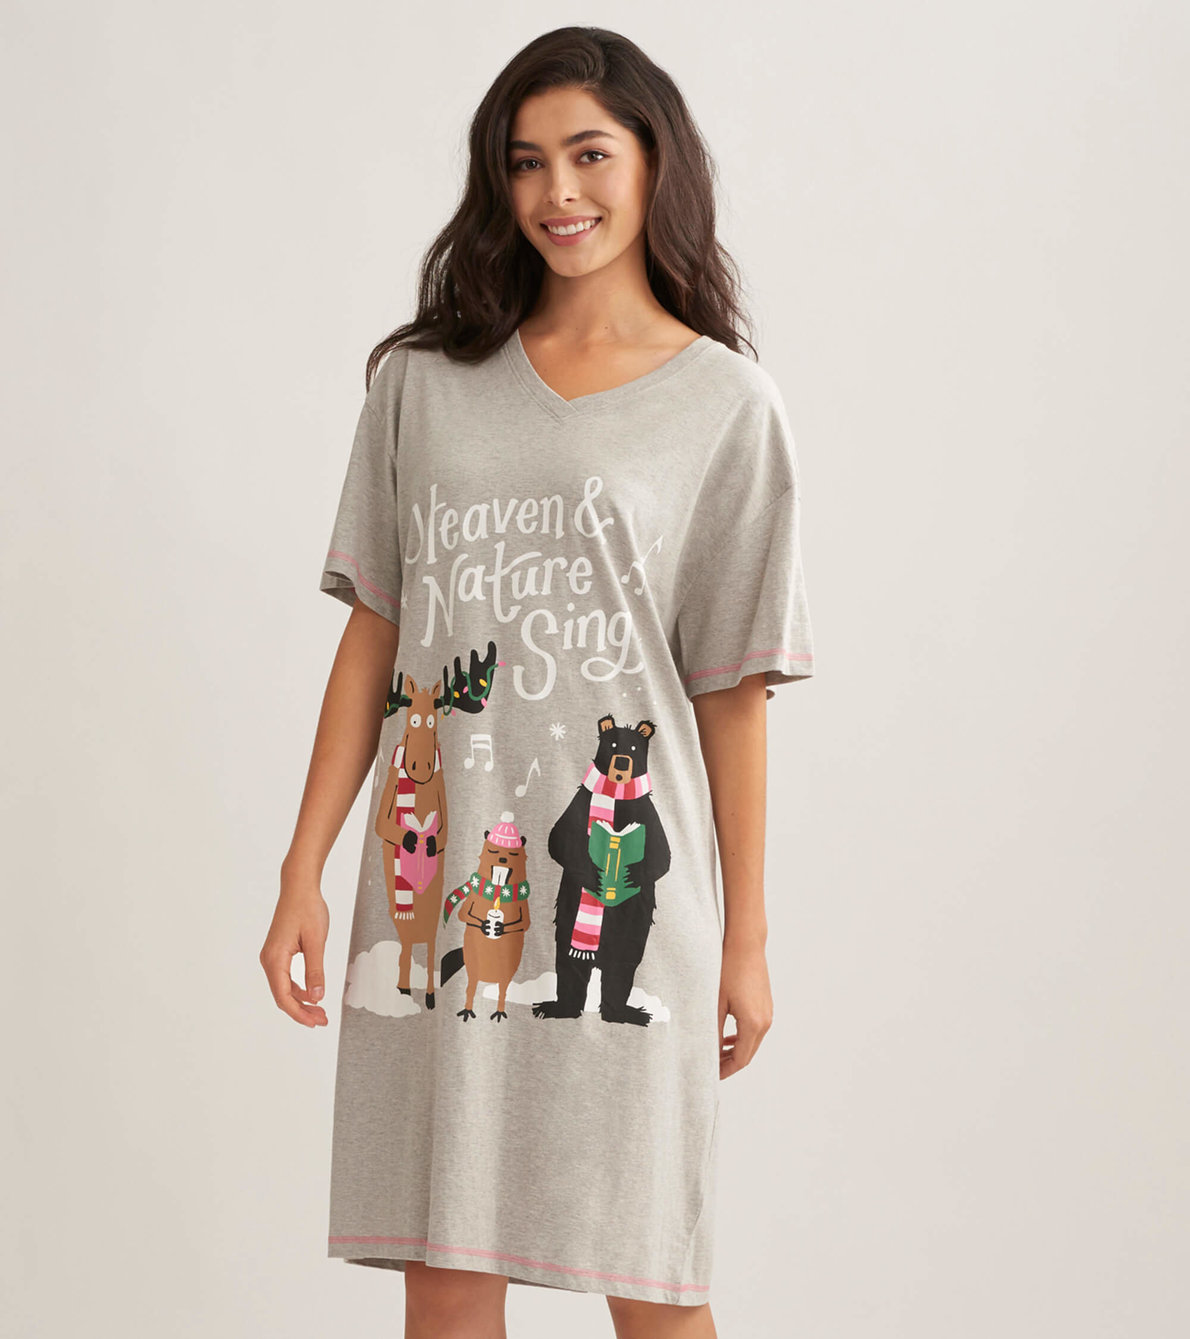 View larger image of Women's Heaven And Nature Sing Sleepshirt